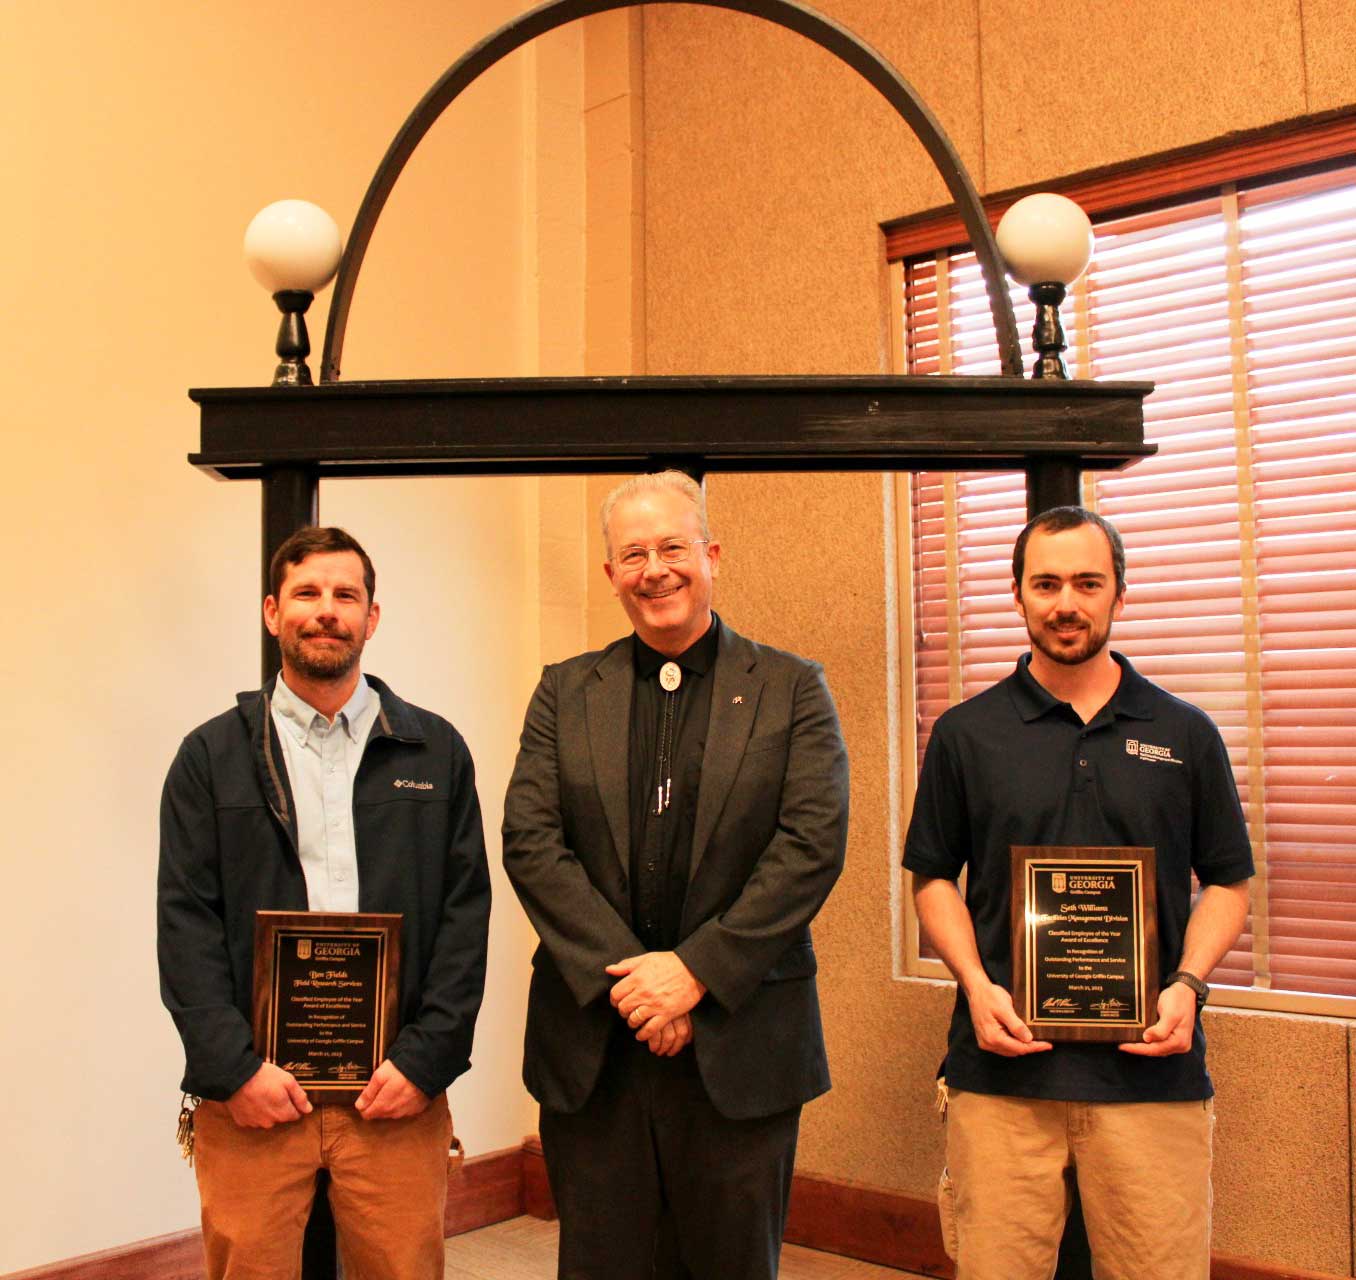 Jeffrey Dean (center), Assistant Provost and Campus Director for UGA Griffin with the 2023 Classified Employee Award recipients, Ben Fields (left) of Field Research Services and Seth Williams (right) of Facilities Management Division.